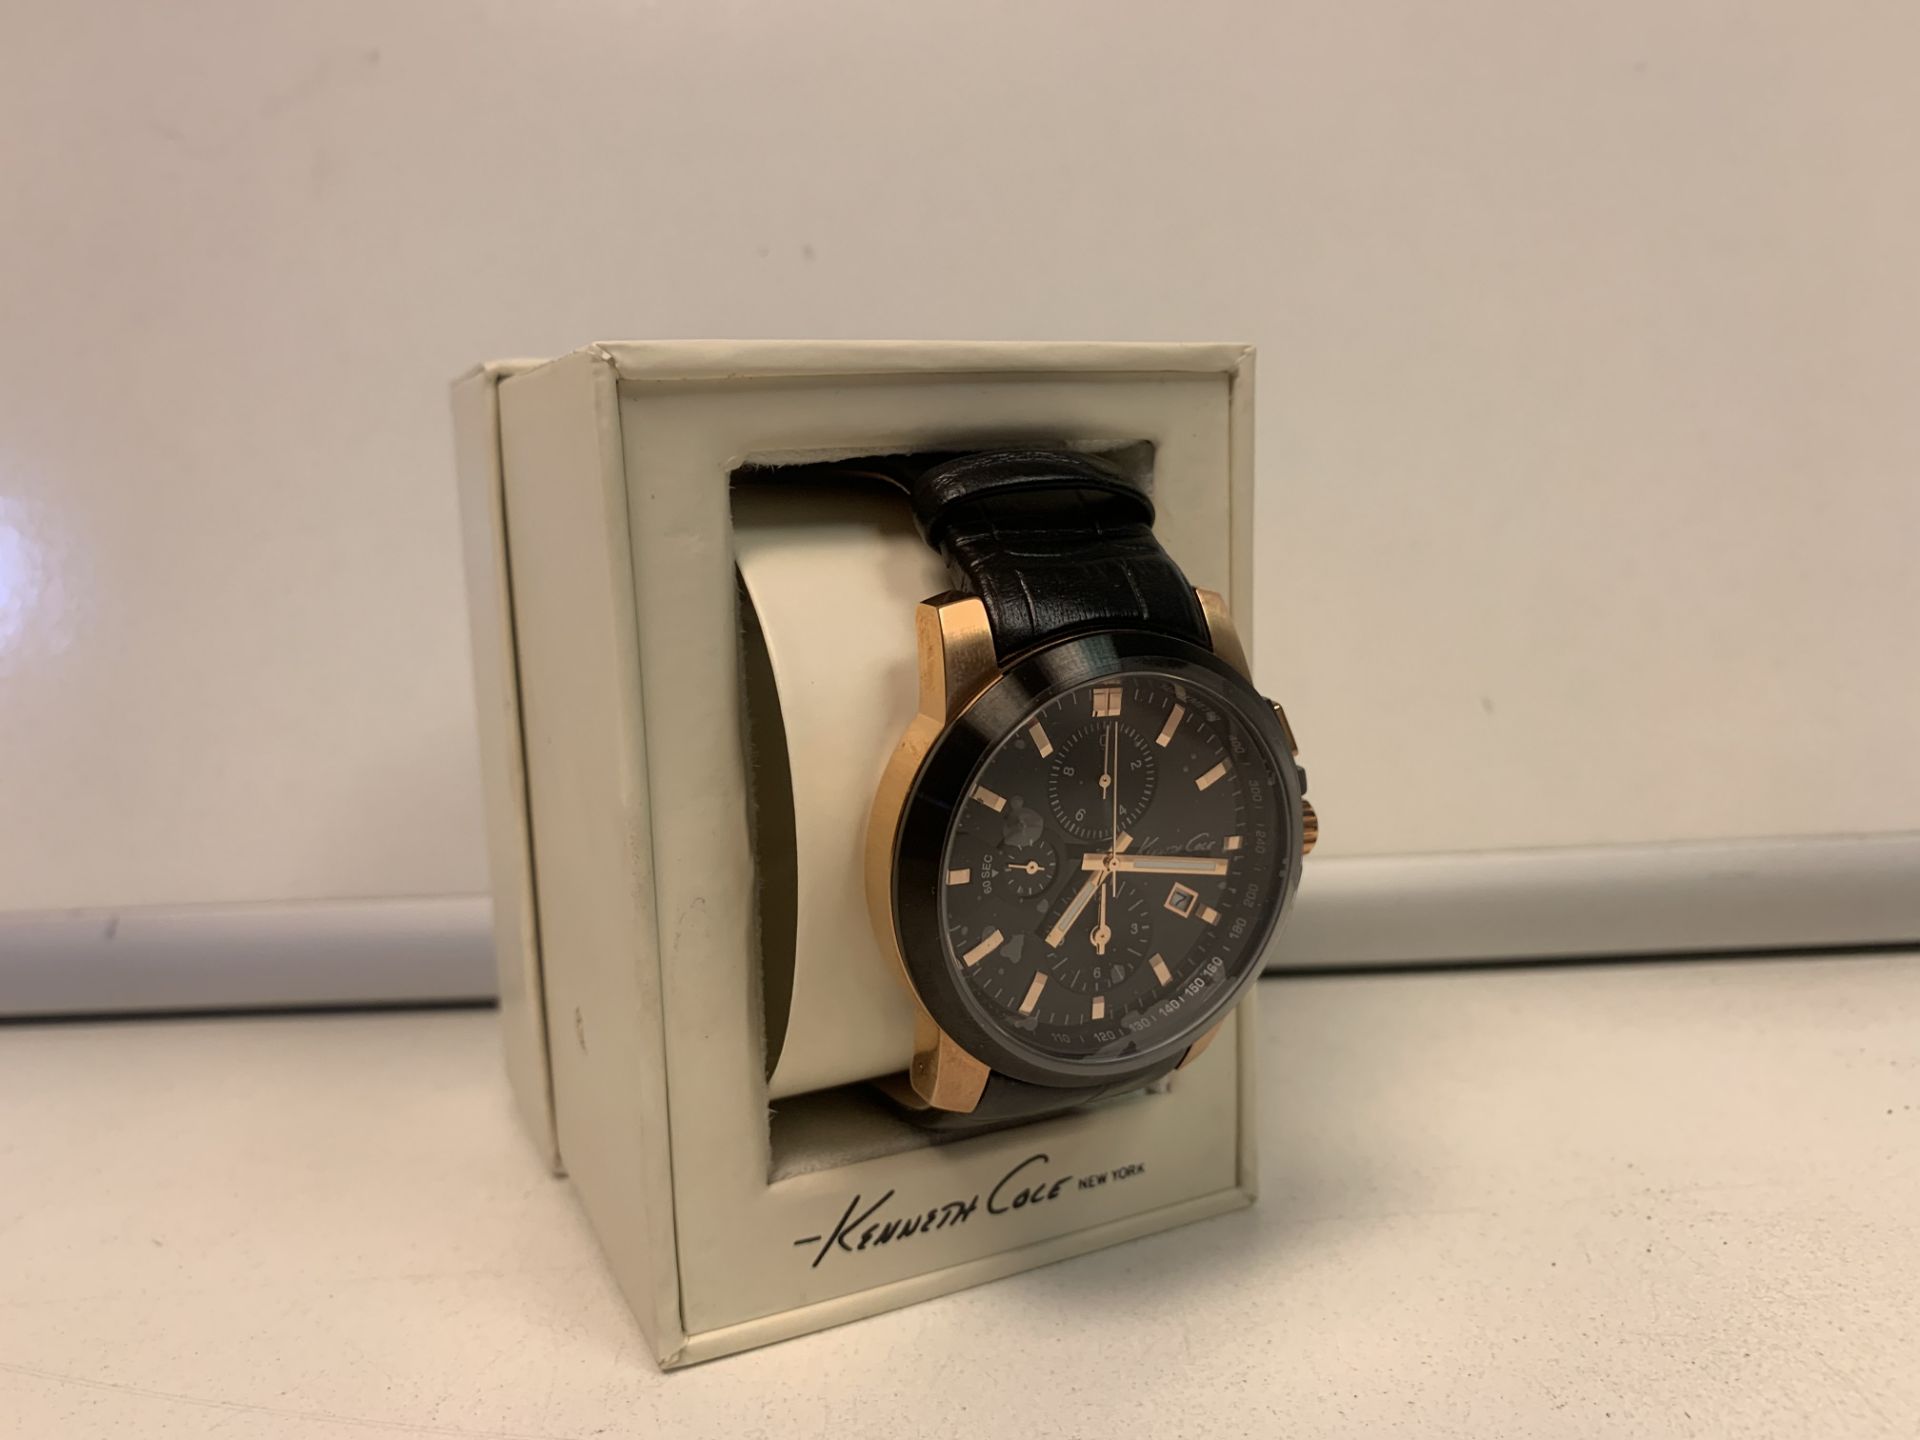 BRAND NEW RETAIL BOXED KENNETH COLE CHRONOGRAPH WATCH